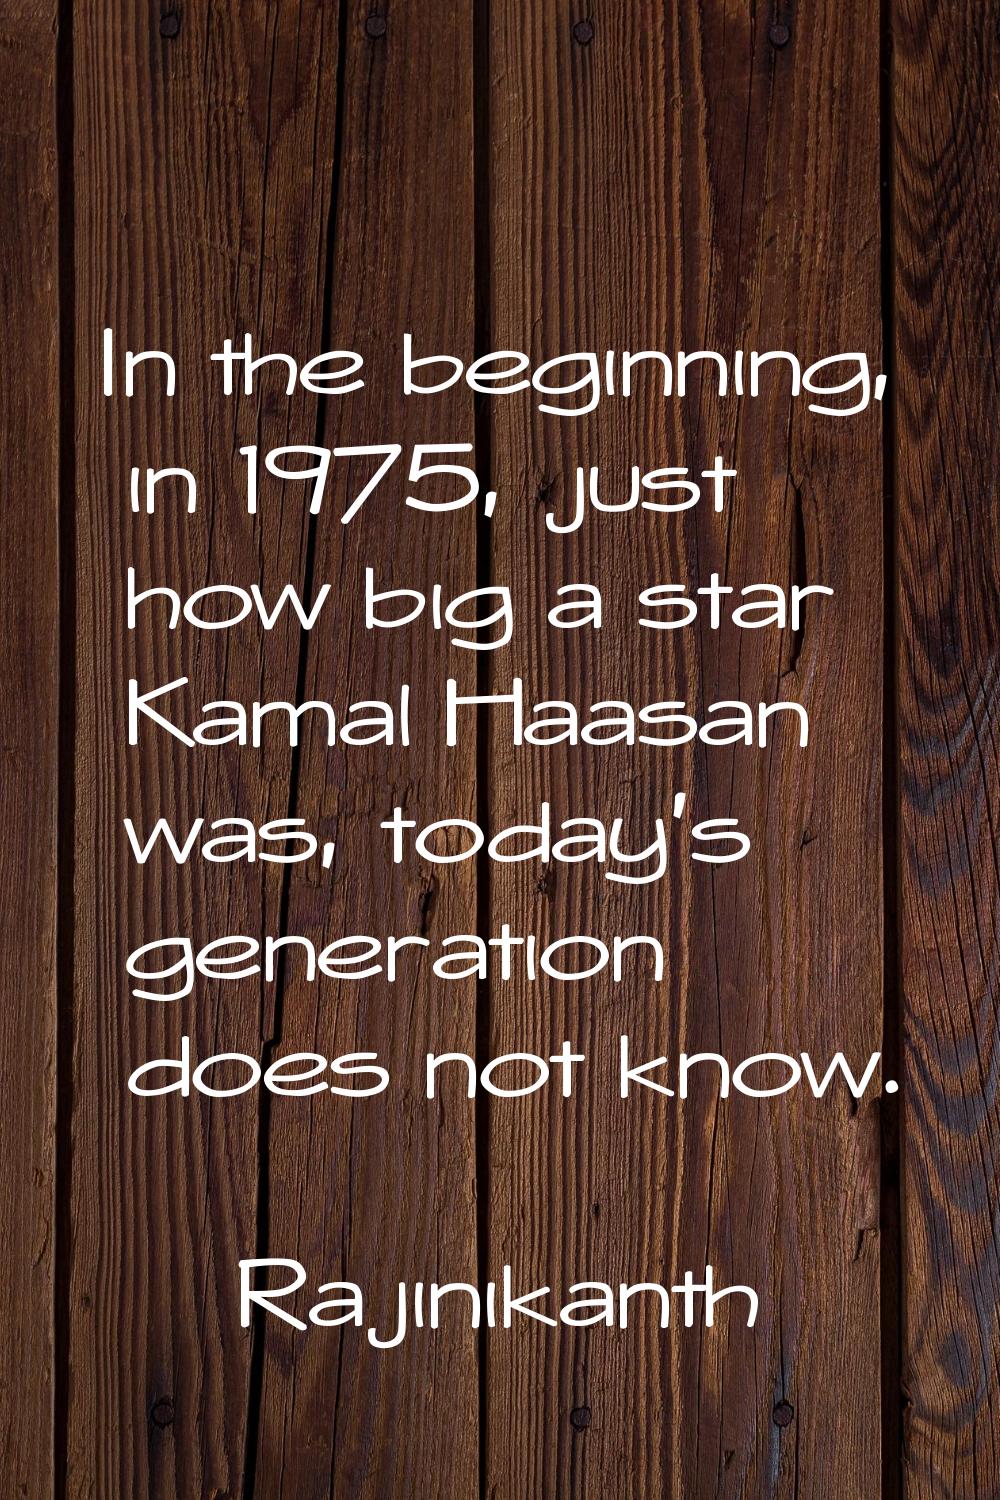 In the beginning, in 1975, just how big a star Kamal Haasan was, today's generation does not know.